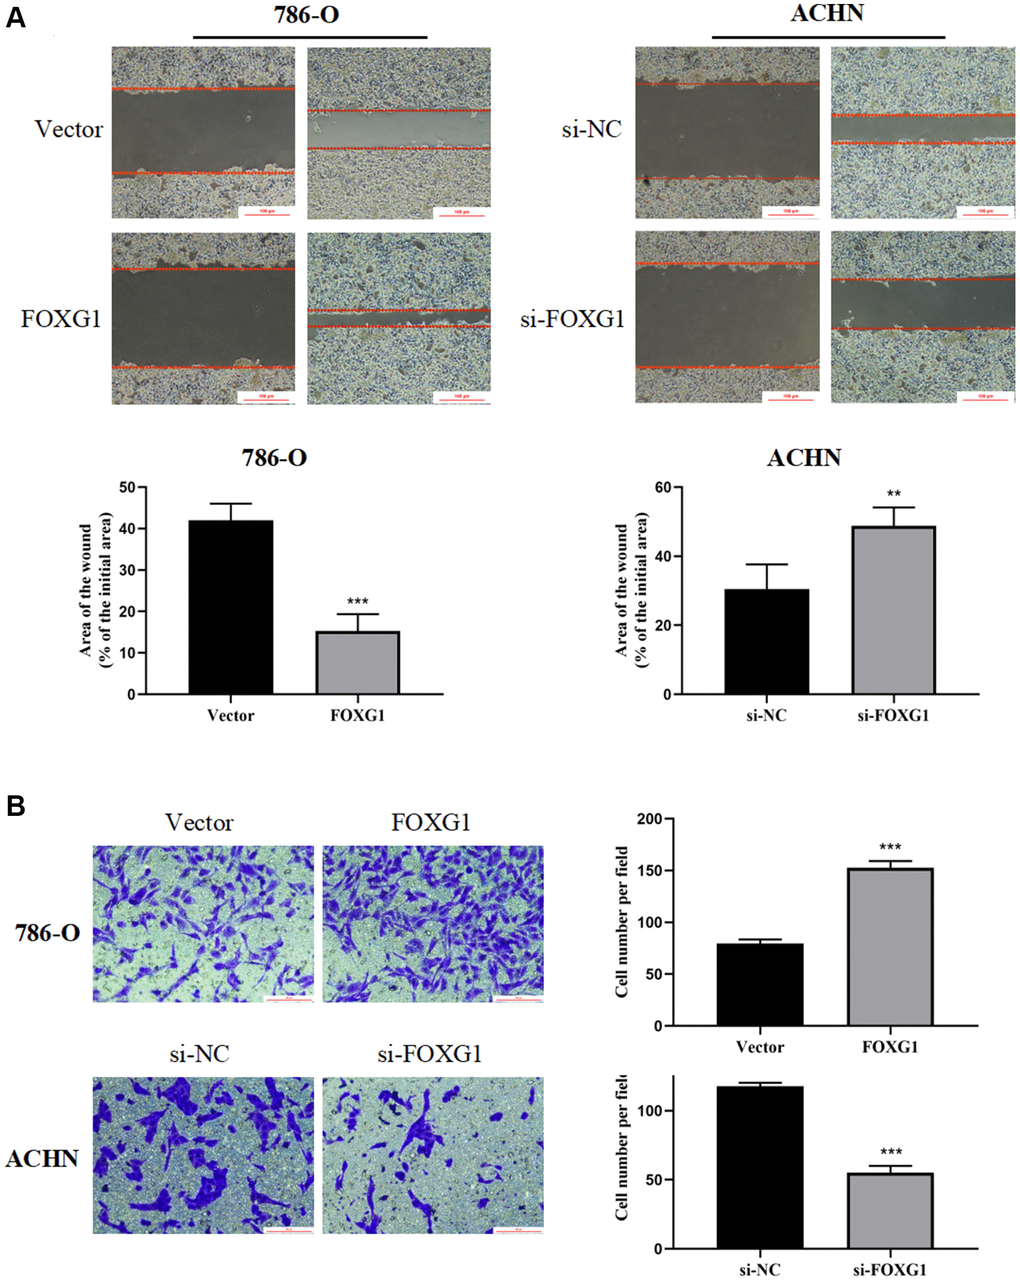 FOXG1 promotes migration and invasion of RCC cell lines. (A) Wound healing assay results of 786-O and ACHN cells after overexpression or knockdown of FOXG1. (B) Transwell assay result of 786-O and ACHN cells following FOXG1 overexpression or silencing. The data are presented as the mean ± standard deviation (SD) of experiments performed in triplicate. *p **p ***p 